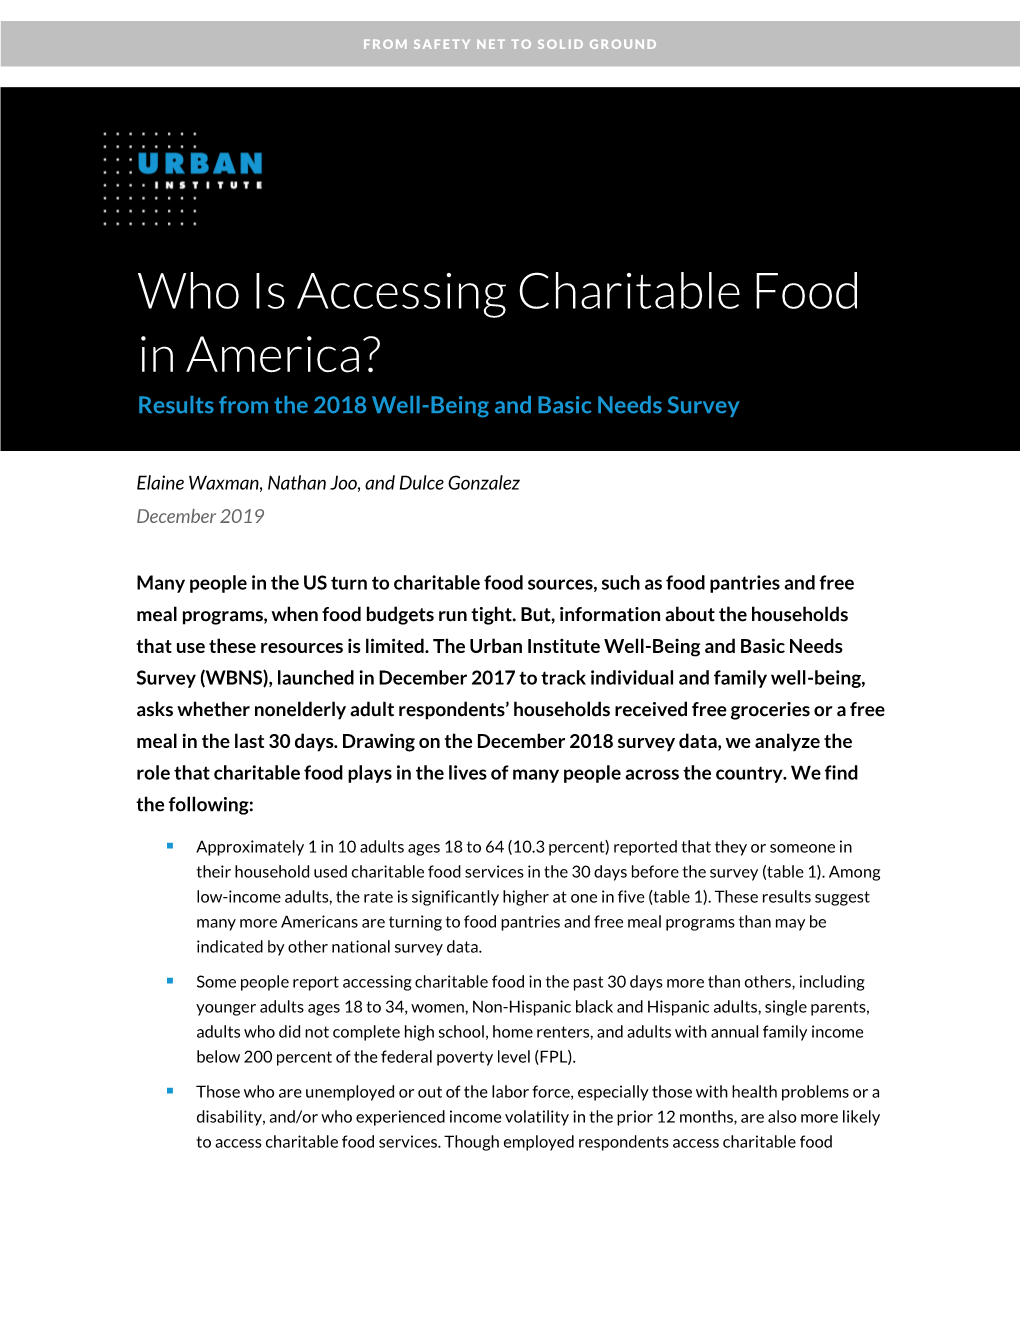 Who Is Accessing Charitable Food in America? Results from the 2018 Well-Being and Basic Needs Survey